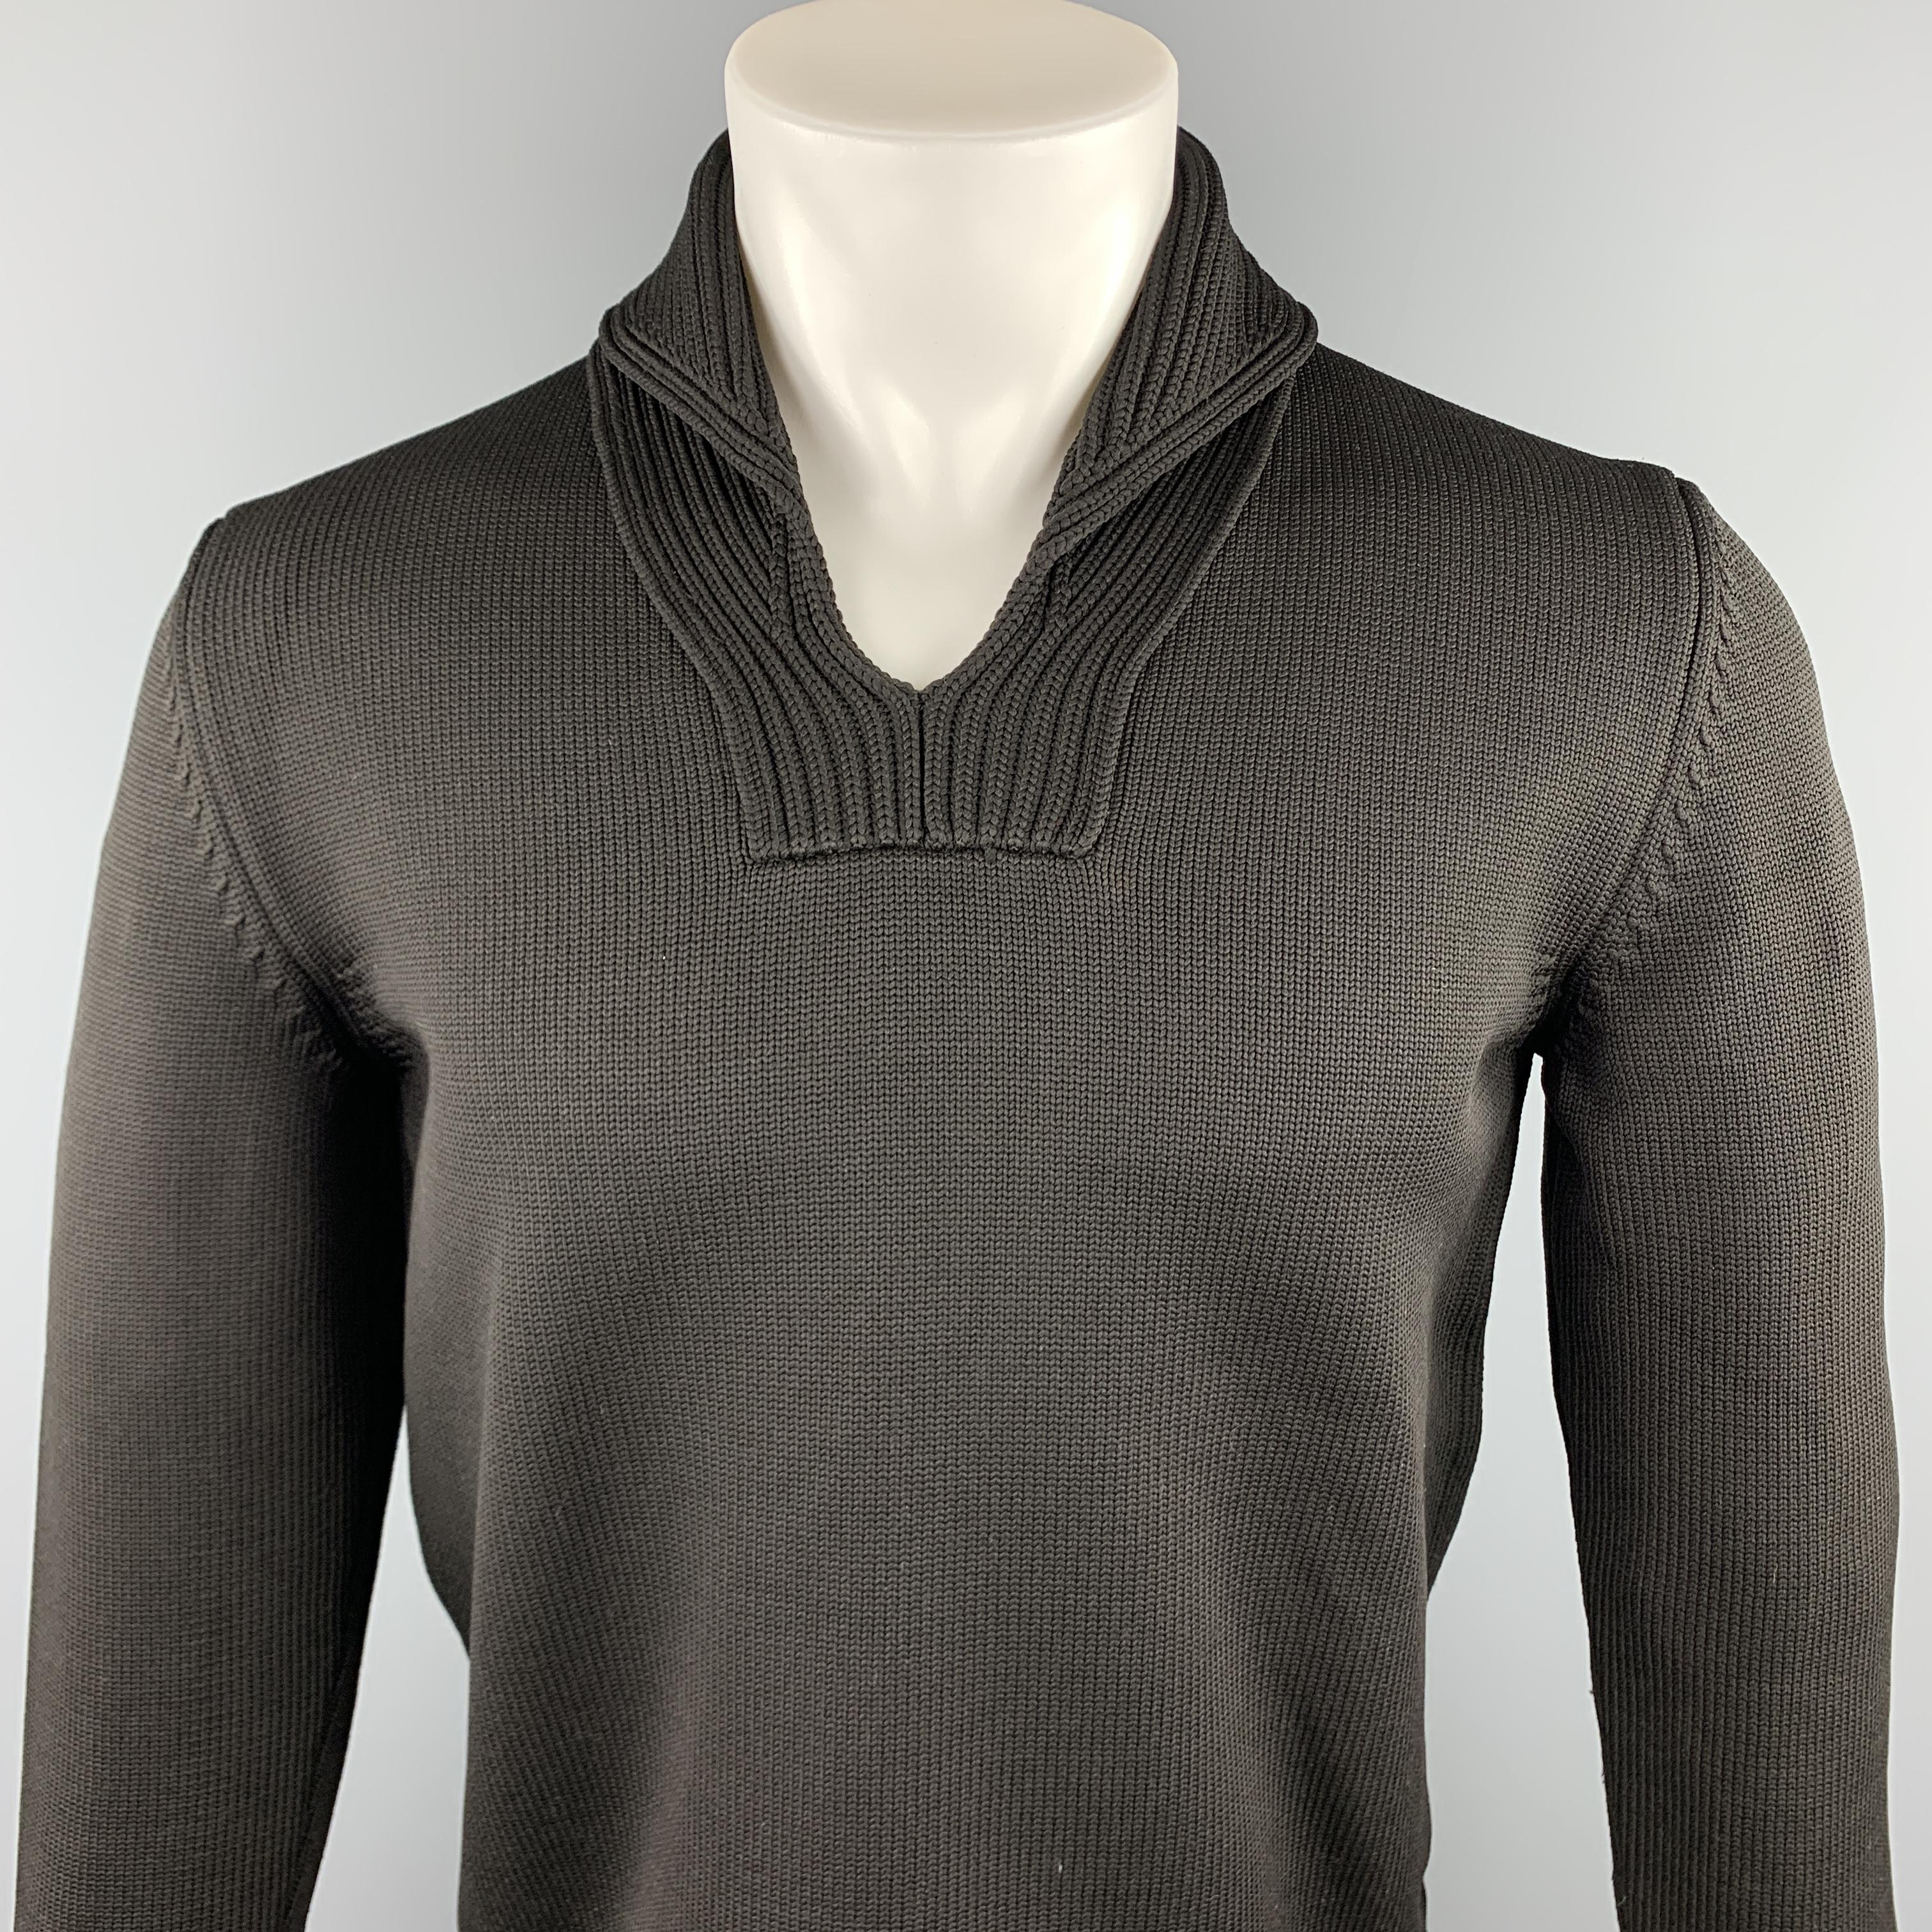 JIL SANDER sweater comes in a black knitted polypropylene featuring a shawl collar. Made in Italy.

Excellent Pre-Owned Condition.
Marked: IT 48

Measurements:

Shoulder: 17 in. 
Chest: 38 in. 
Sleeve: 24.5 in. 
Length: 24.5 in. 